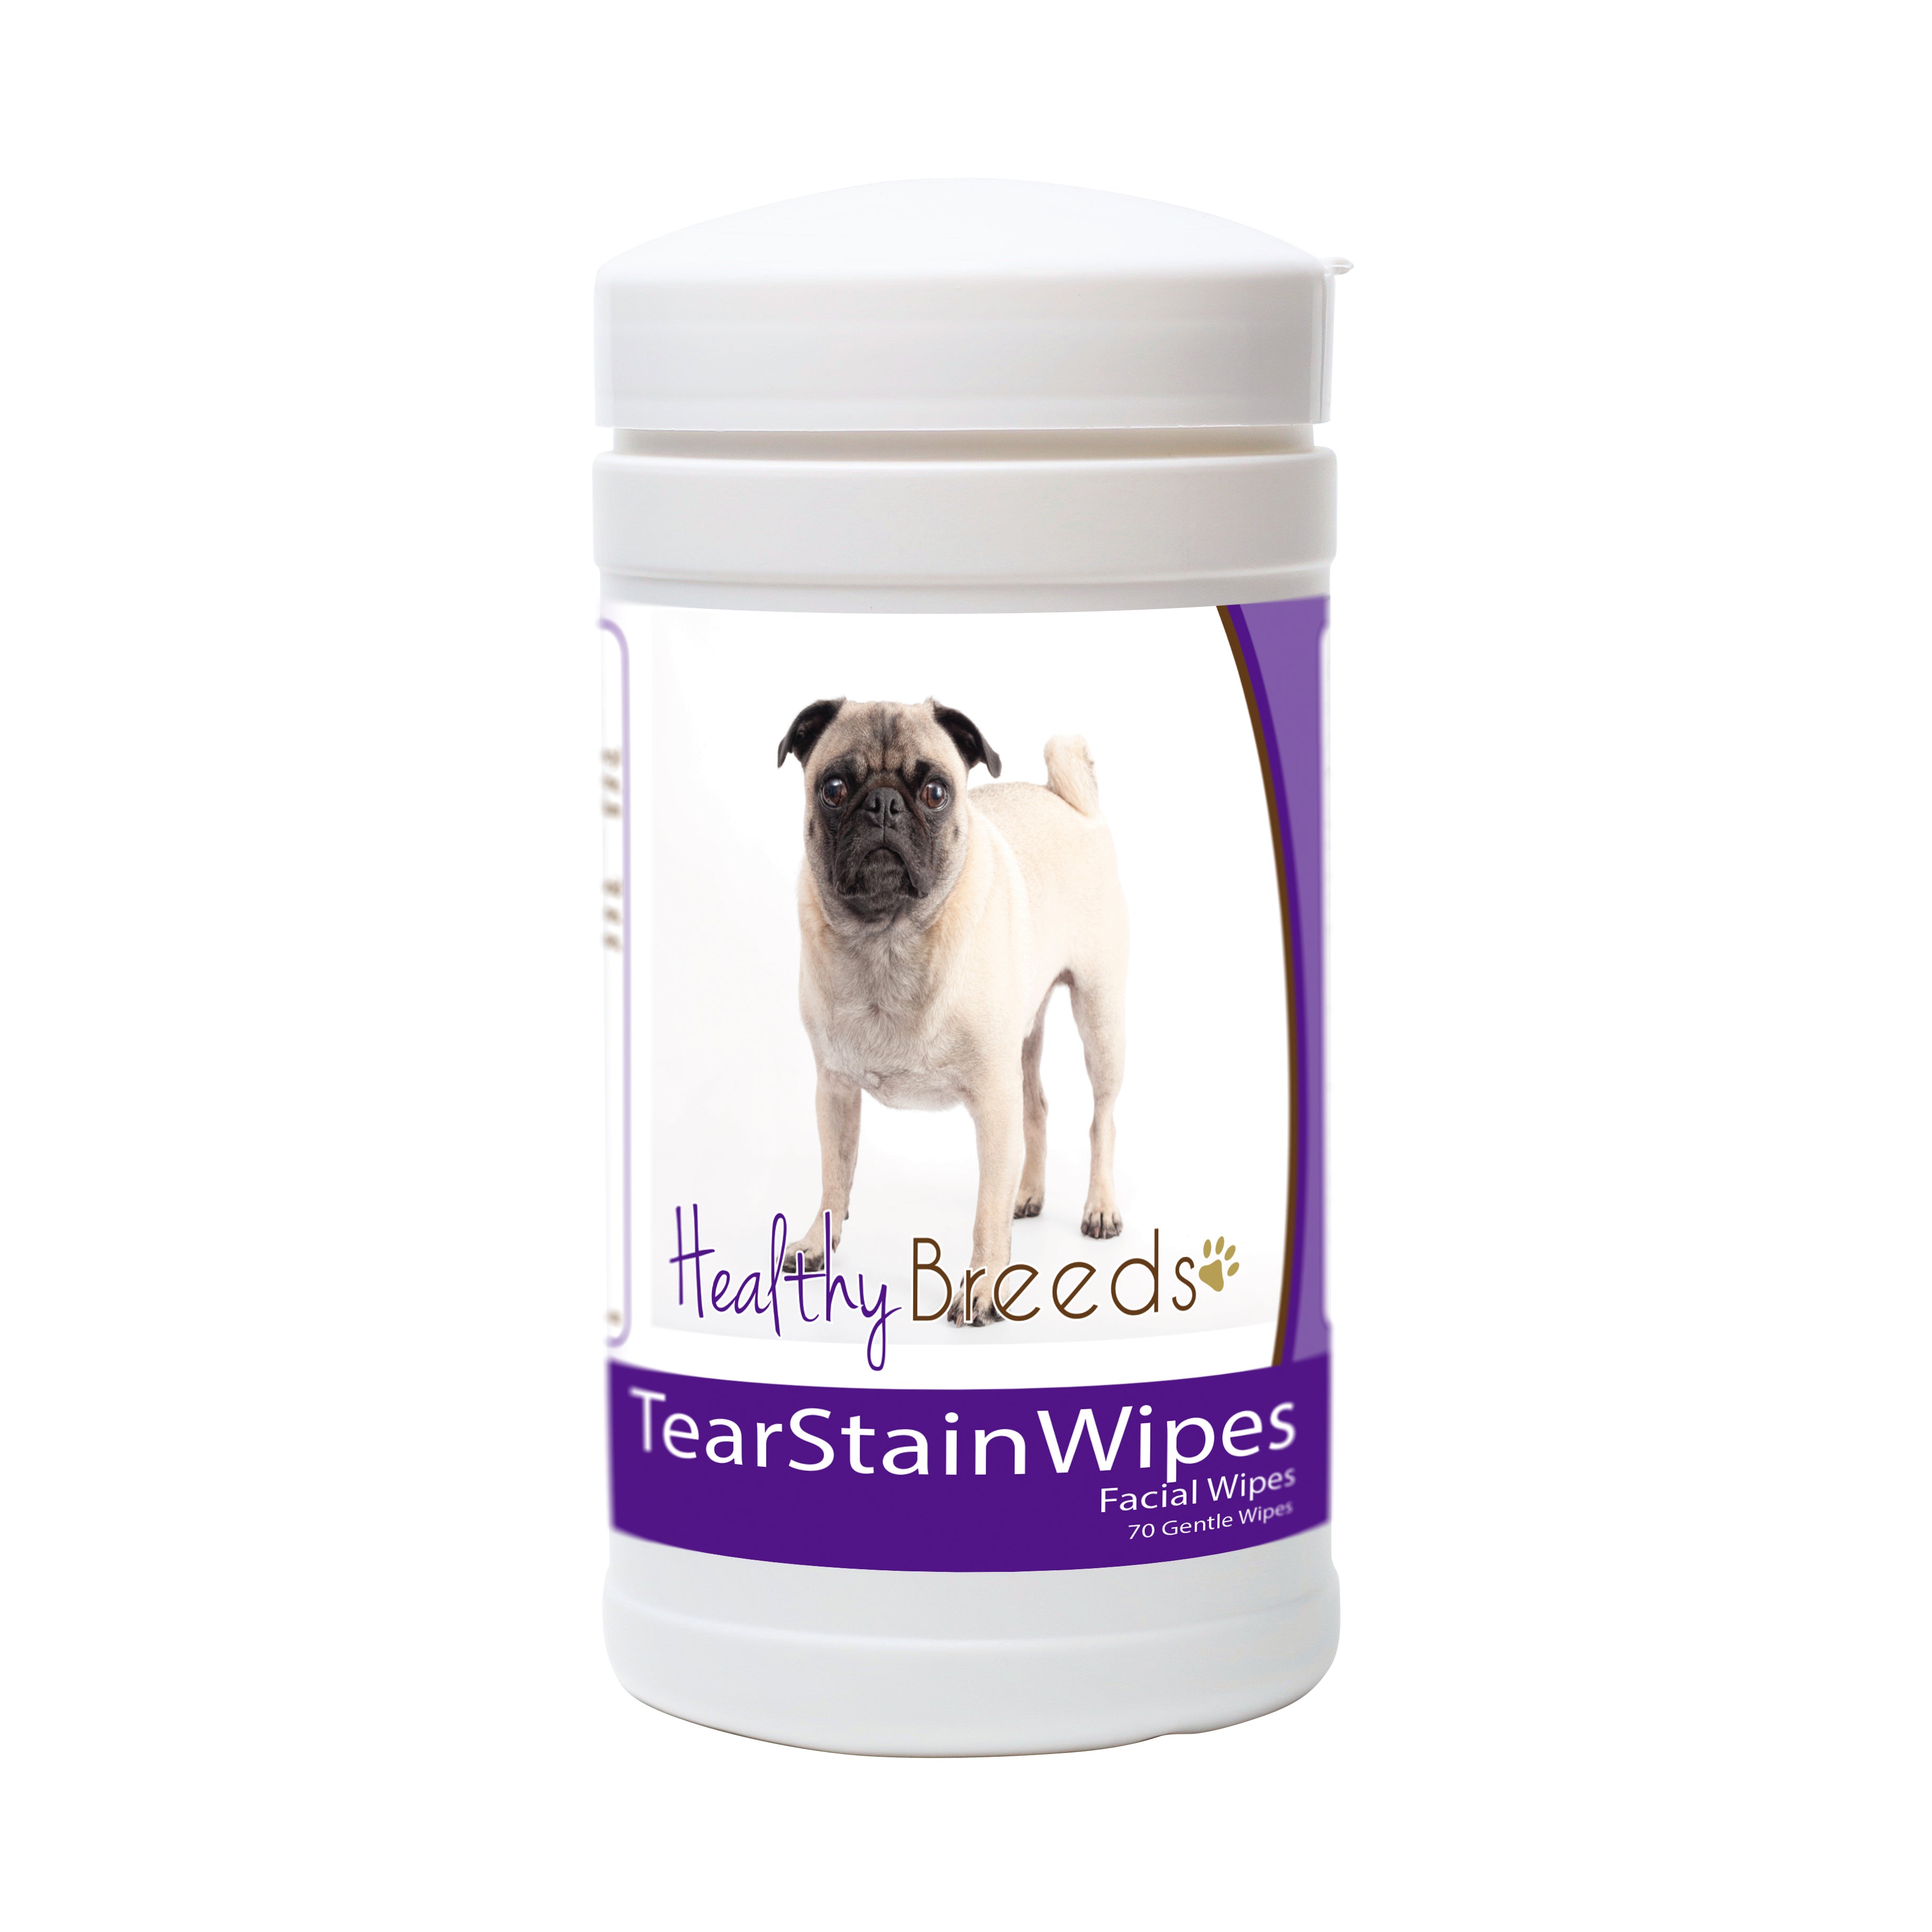 Pug Tear Stain Wipes 70 Count